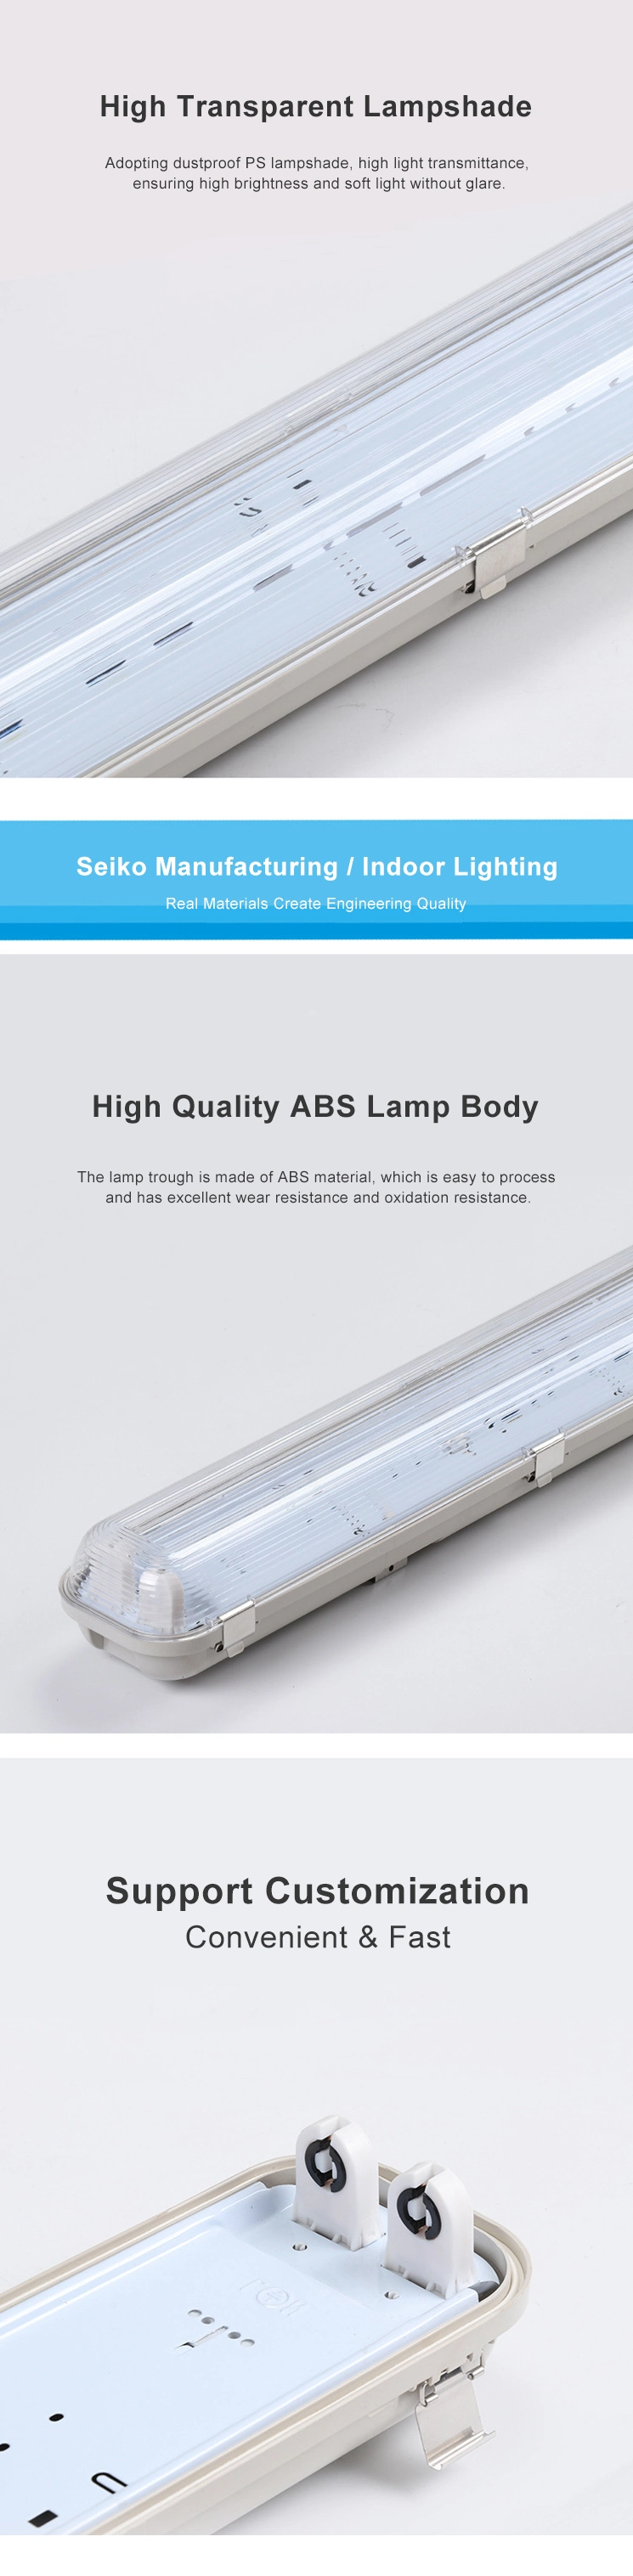 Fire Emergency Light LED Isolated Tri-proof Light LED Tube Light Tube Lighting Fluorescent Light Tubes LED Fluorescent Light LED Tube Light Fixture